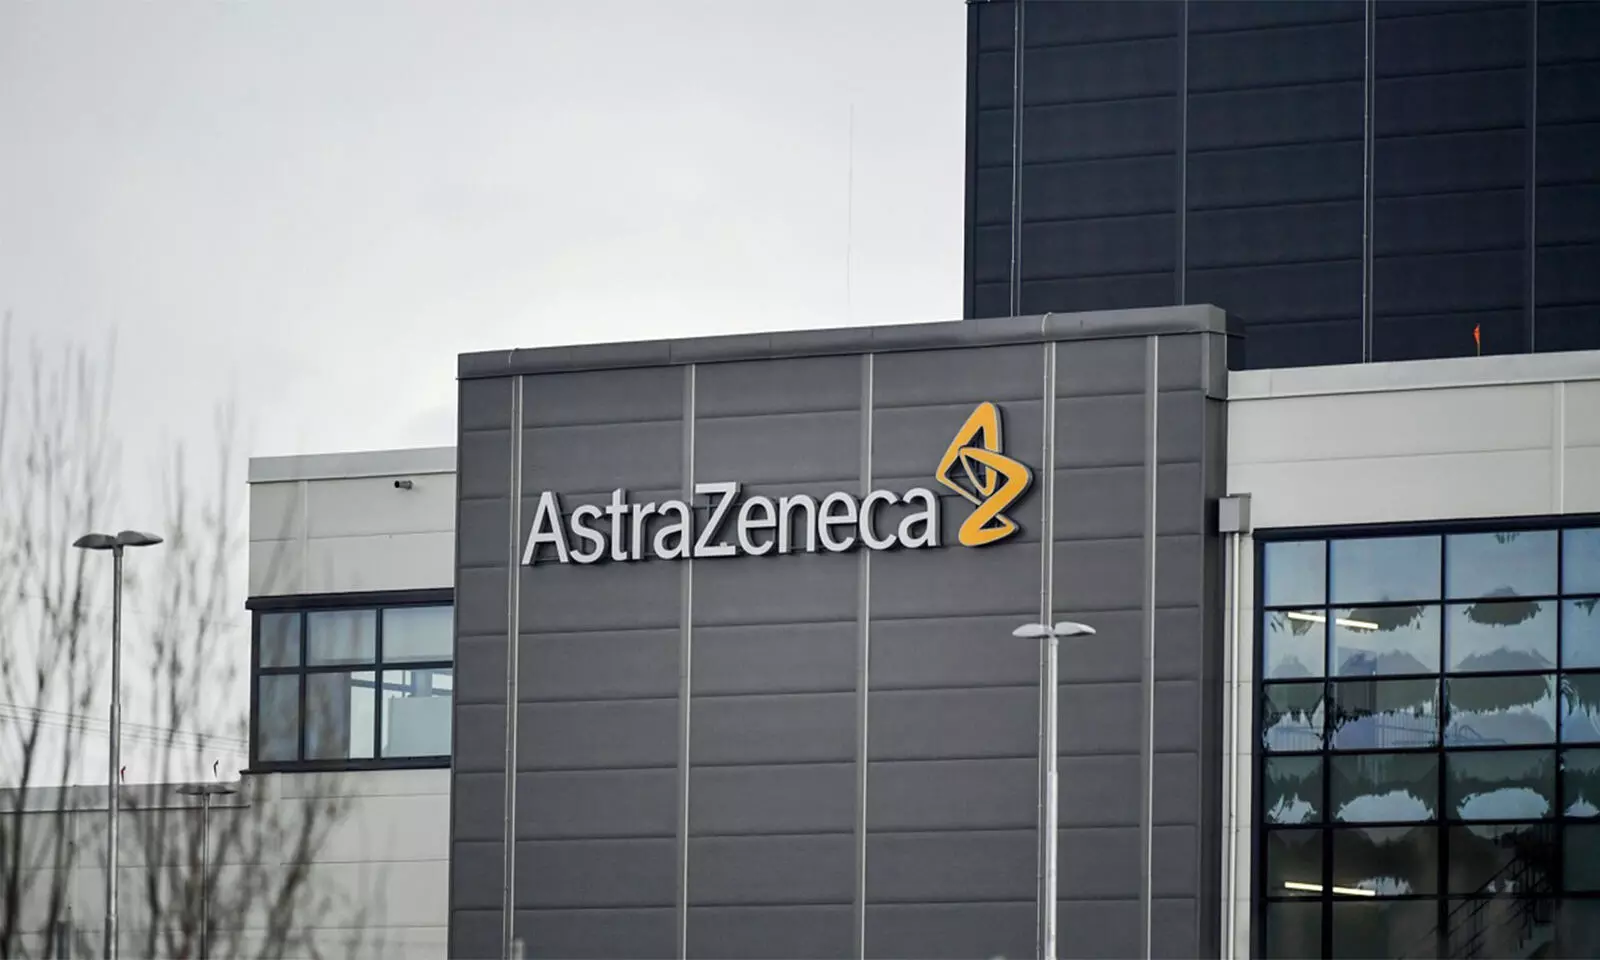 AstraZeneca begins to earn mild profit from Covid-19 vaccine